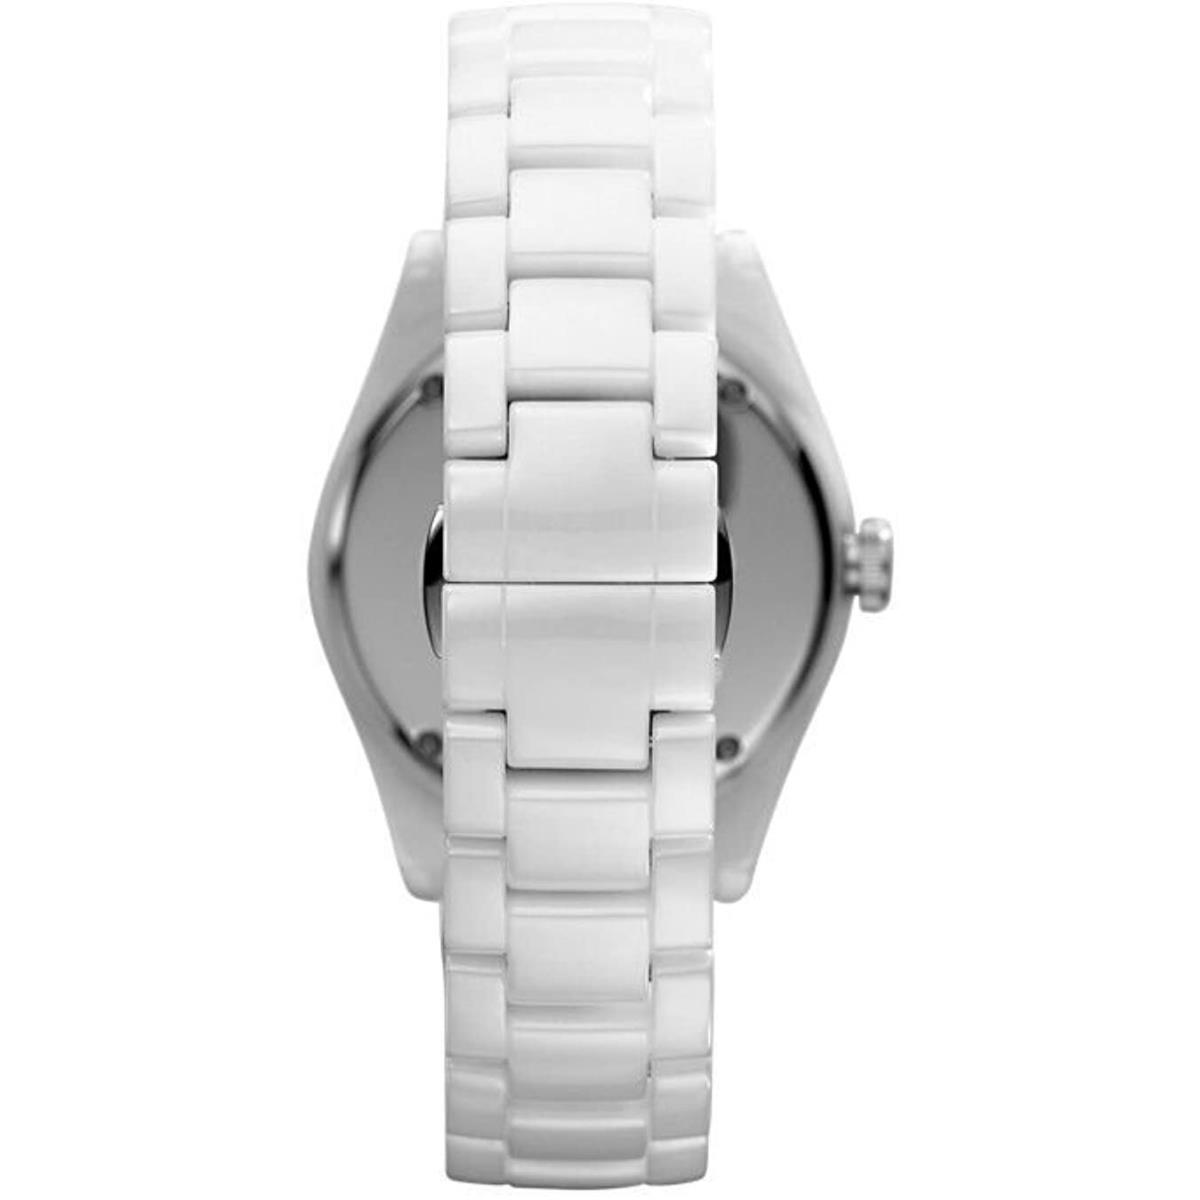 Emporio Armani watch  - Mother Of Pearl Face, Mother of Pearl Dial, White Band